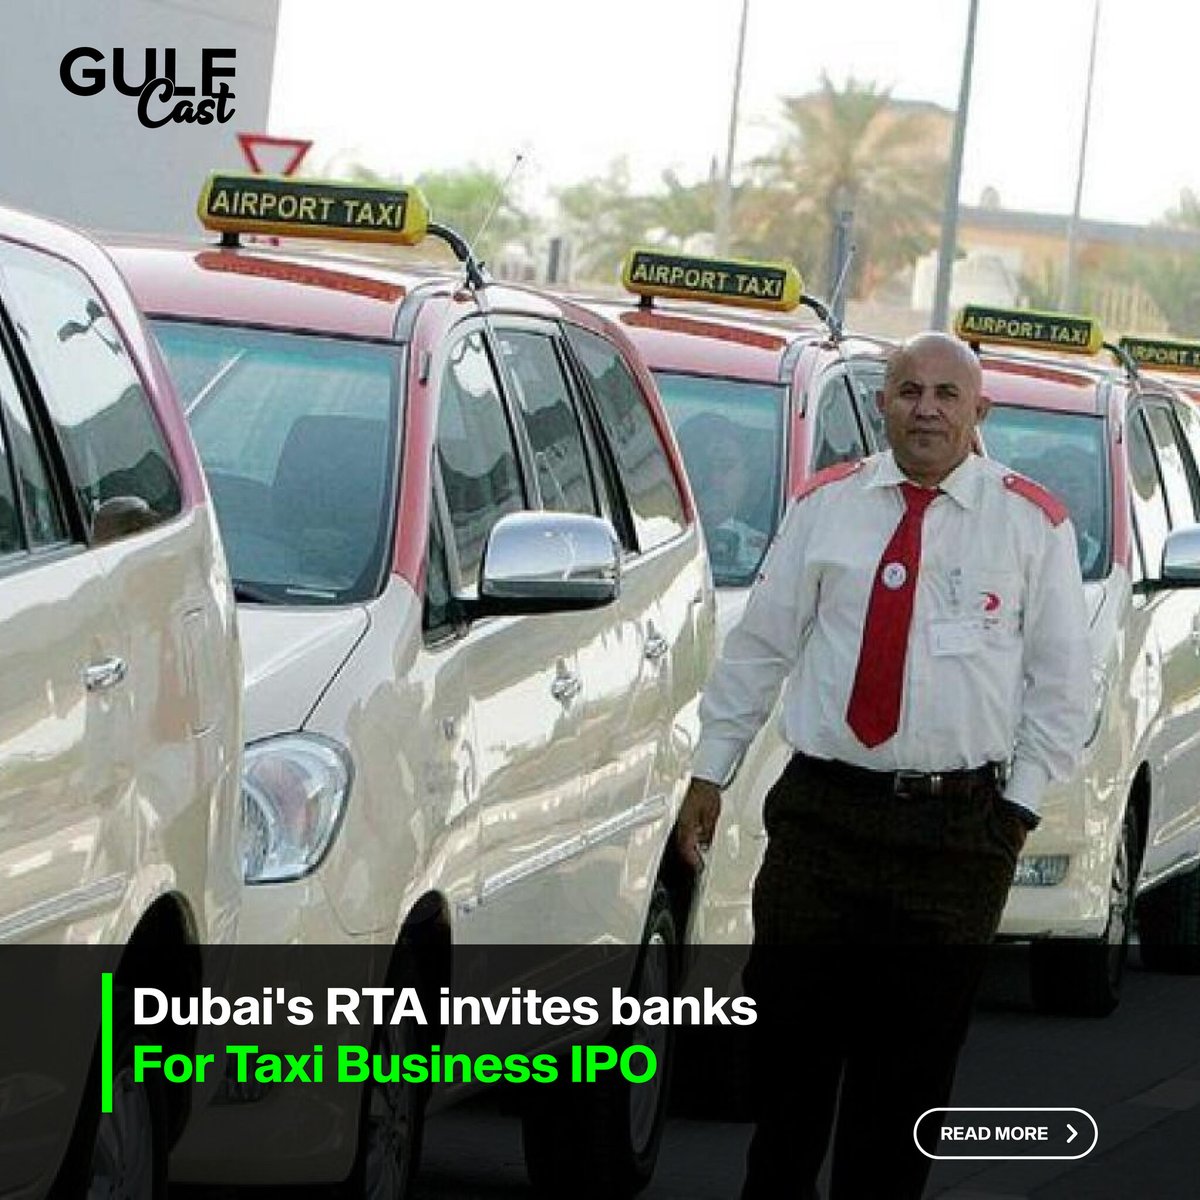 📢 Exciting News from Dubai! RTA is gearing up for an IPO of its taxi business! Investment banks are being invited to pitch for a role in this potential public share sale.

For Detail: bit.ly/3Y2LFFJ

#Dubai #RTA #IPO #TaxiBusiness #Transportation #NewsUpdate #gulfcast